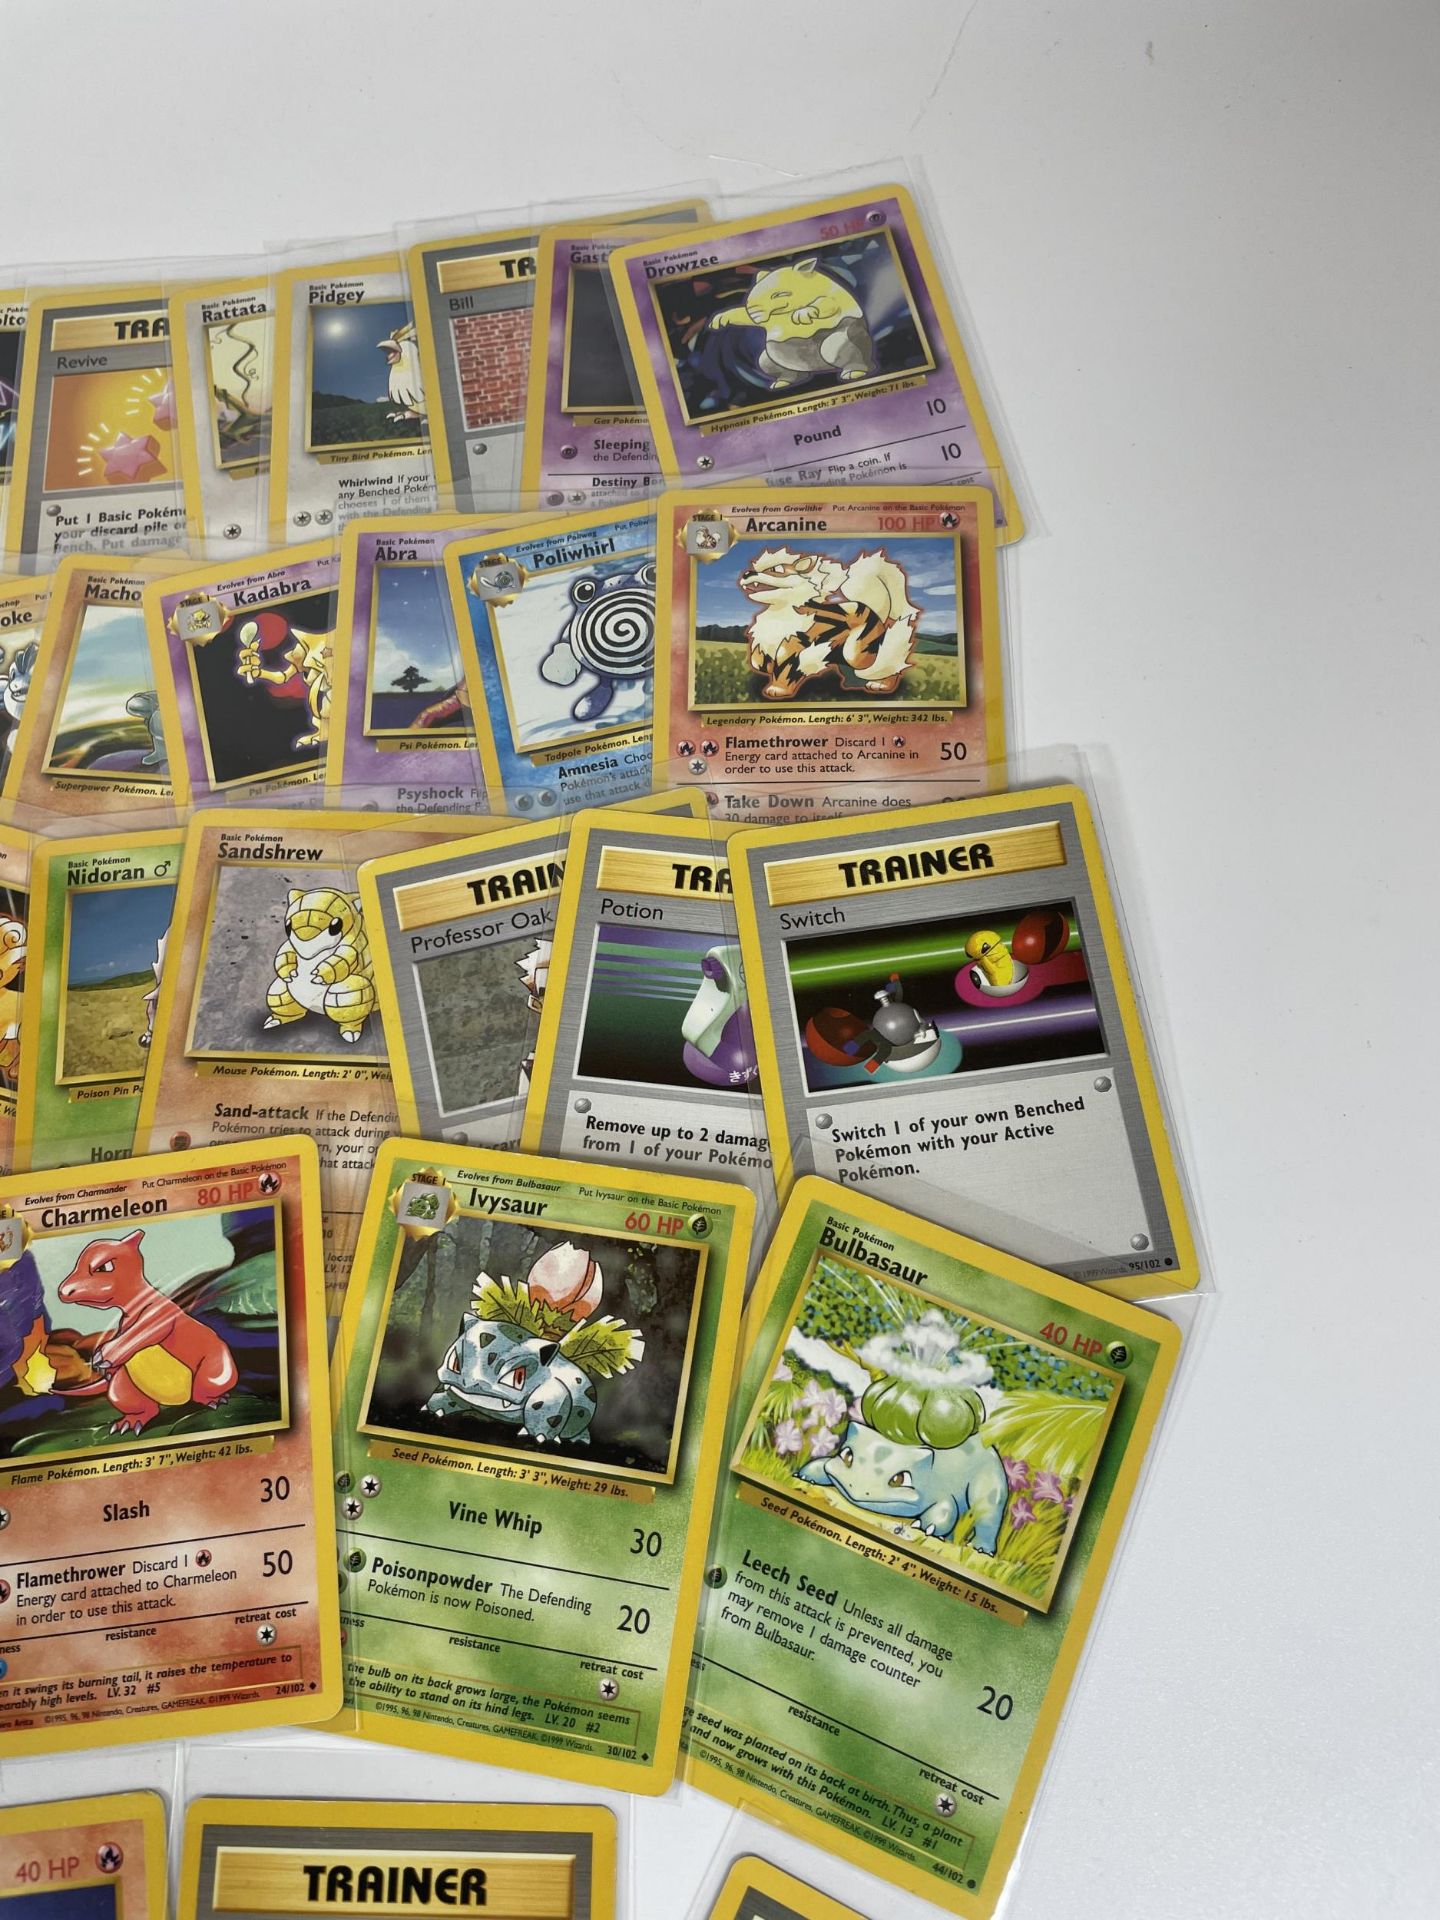 A COLLECTION OF WOTC 1999 BASE SET POKEMON CARDS, SHADOWLESS, SQUIRTLE, BULBSAUR ETC - Image 4 of 7